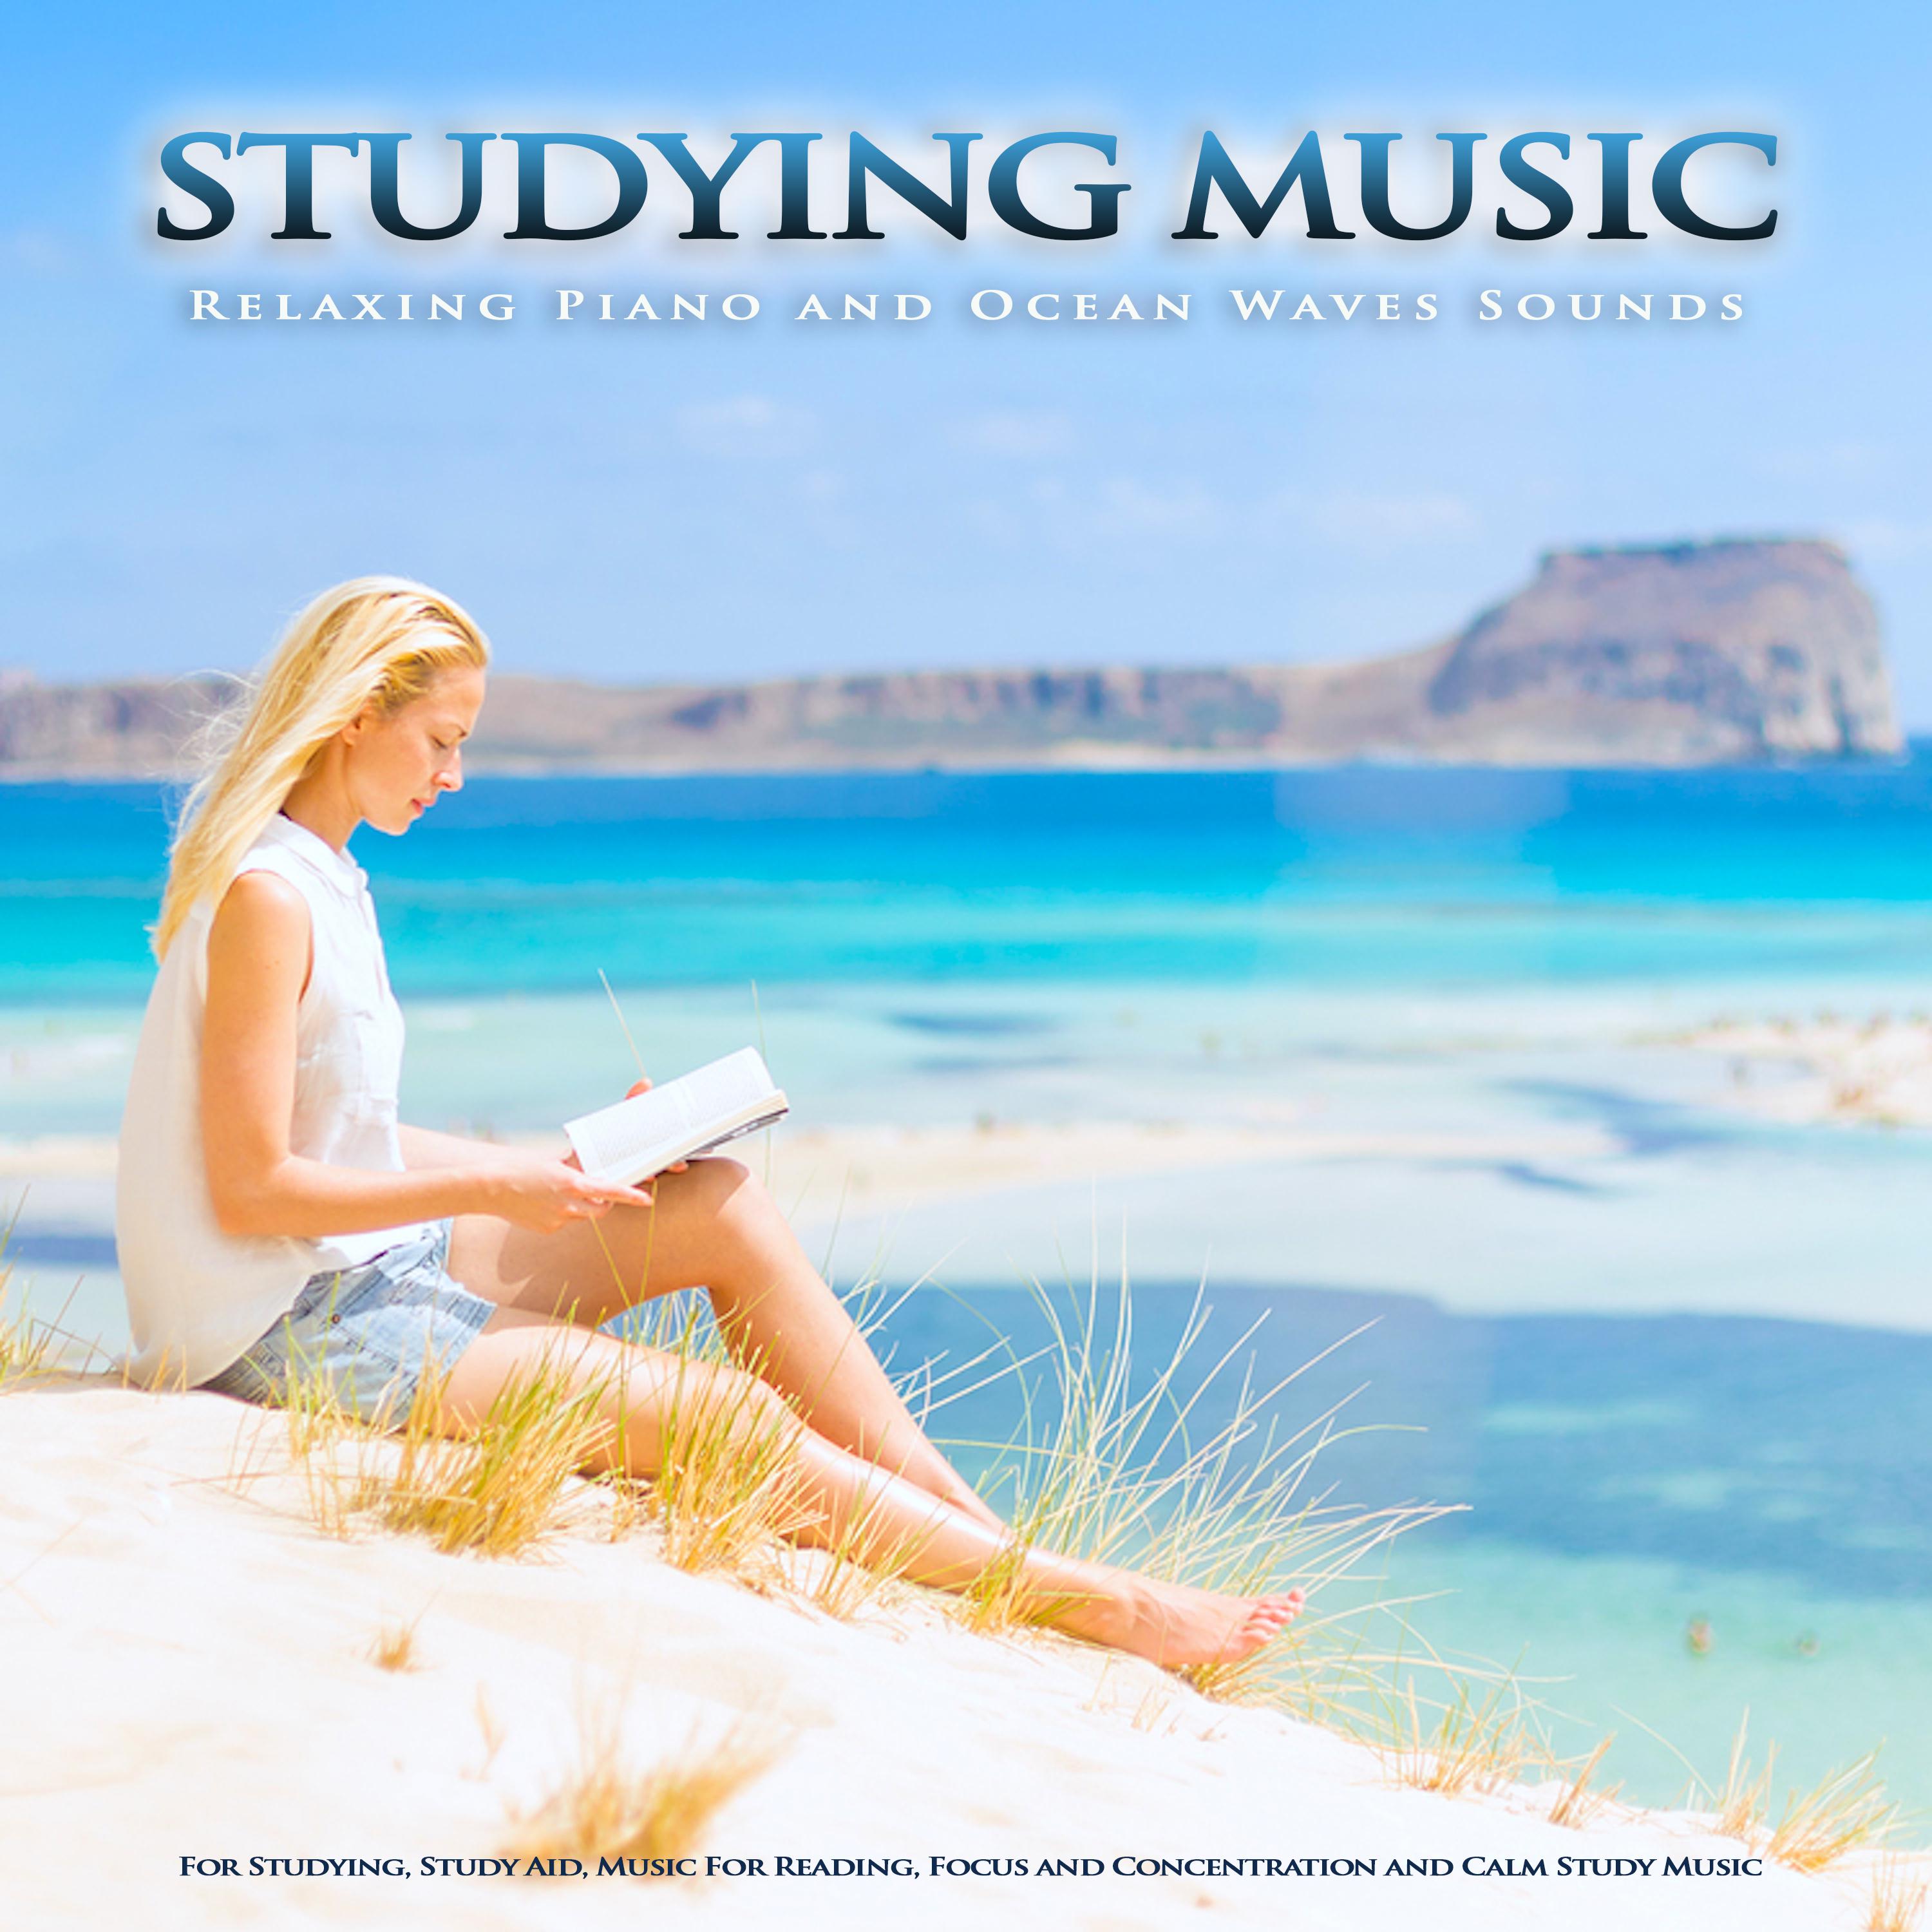 Sounds of the Ocean and Music For Studying